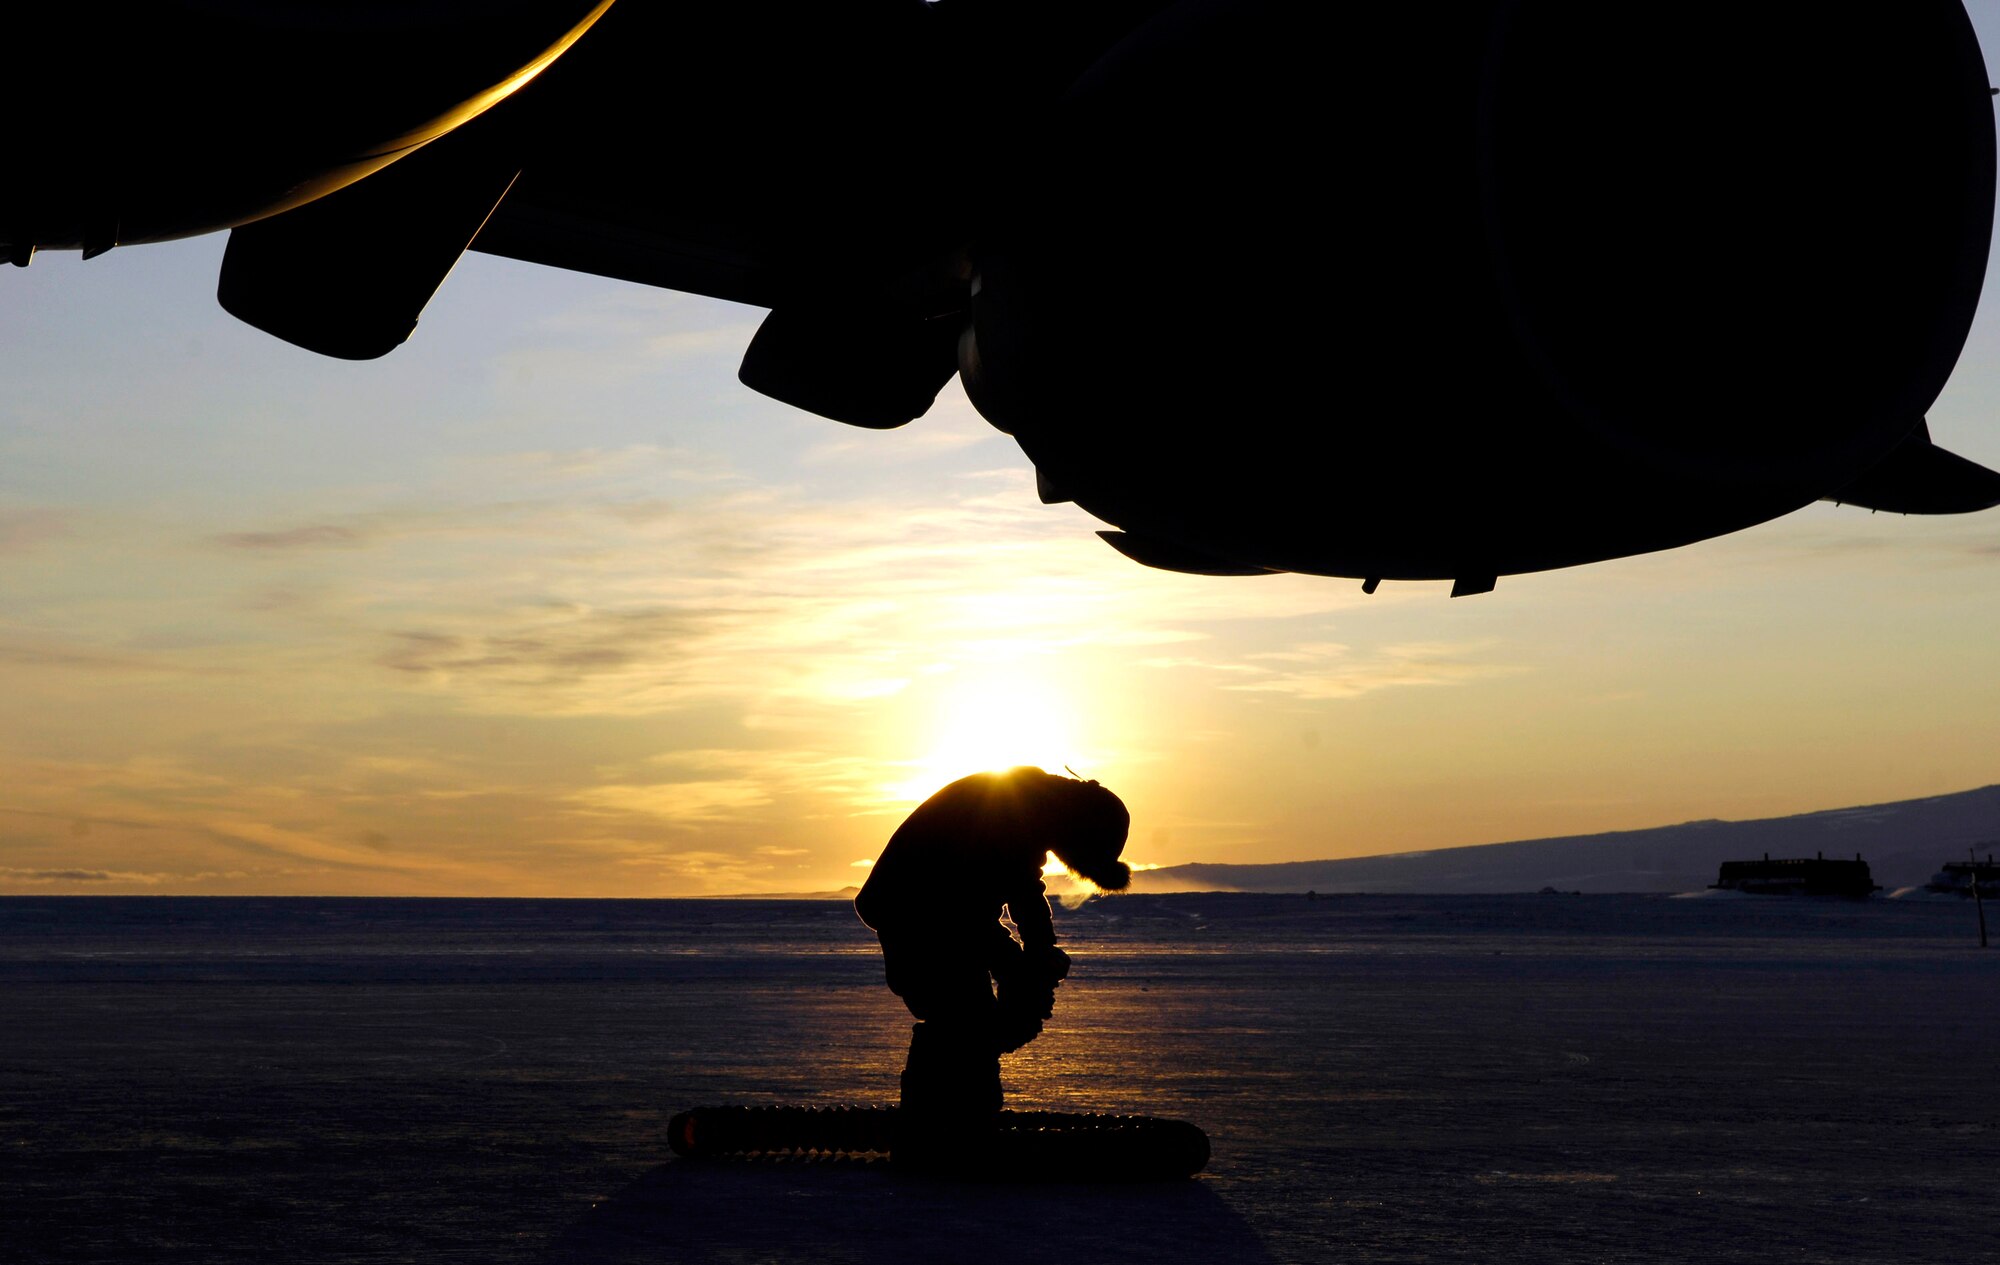 Senior Airman Christian Recene collapses a heater hose that was used to keep the engines of a C-17 Globemaster III warm during an Operation Deep Freeze winter fly-in mission Aug. 25 at Pegasus White Ice Runway, Antarctica. Because of the extreme temperatures, heaters are used on the aircraft to prevent maintenance problems and keep it functioning properly upon engine start-up. A C-17 and 31 Airmen from McChord Air Force Base, Wash., conducted the annual winter fly-in augmentation of scientists, support staff, food and equipment for the U.S. Antarctic Program at McMurdo Station, Antarctica. (U.S. Air Force photo/Tech. Sgt. Shane A. Cuomo) 
